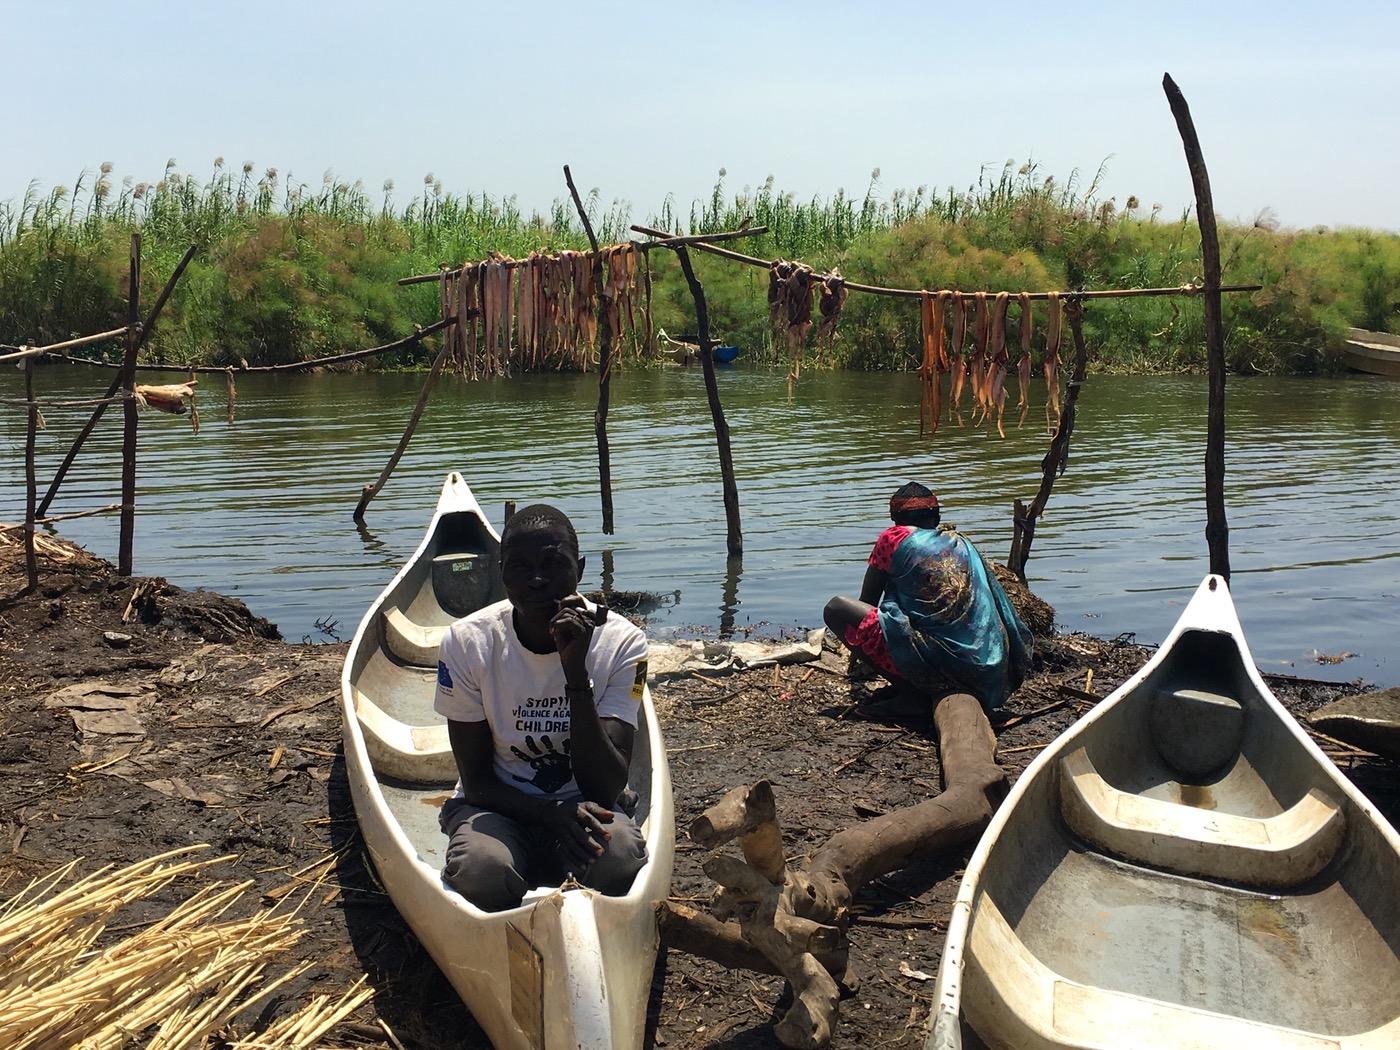 Tayar island’s residents fish for food from the surrounding swamp. Canoe is the only mode of transport off the island.